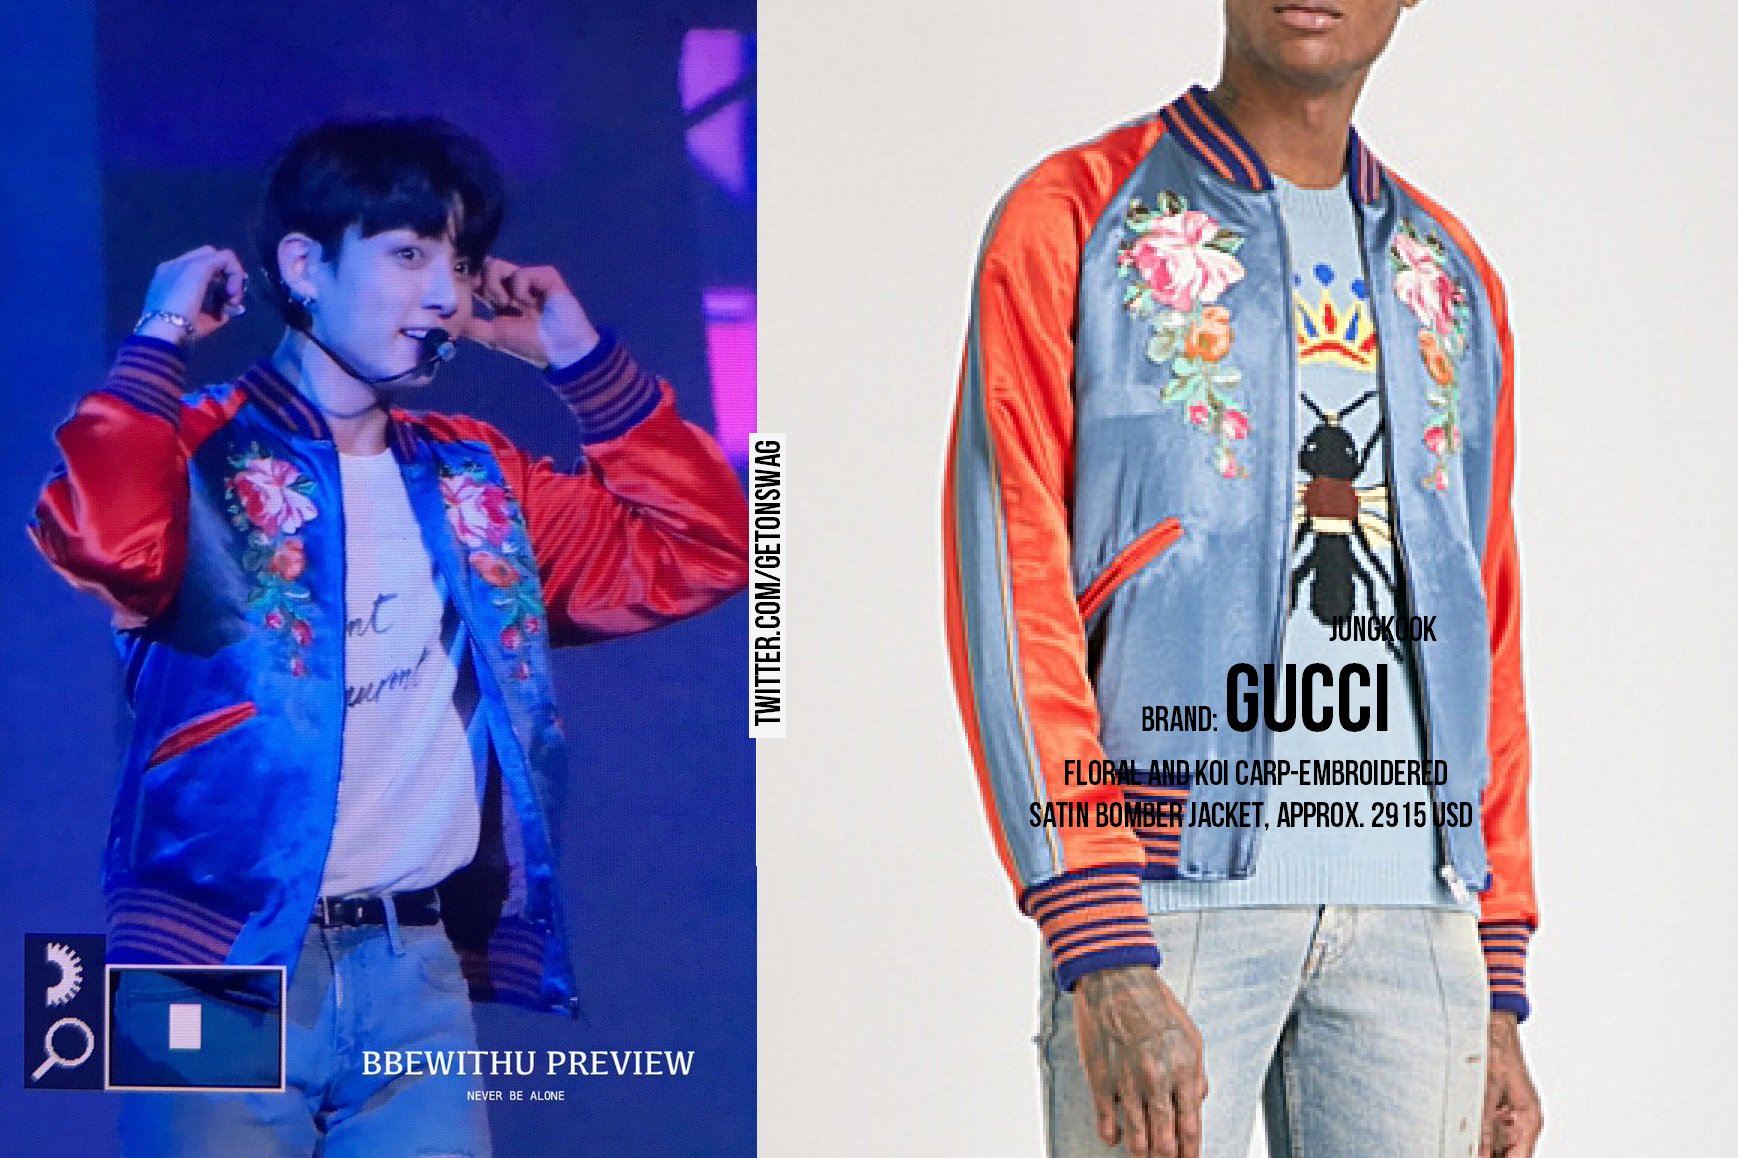 rod Afskedigelse fred Beyond The Style ✼ Alex ✼ on Twitter: "JUNGKOOK #BTS 171119 #AMAs2017 #amas  #JUNGKOOK #정국 #방탄소년단 GUCCI - Floral and Koi carp-embroidered satin bomber  jacket, approx. 2915 usd https://t.co/q5W9MqX9W6" / X